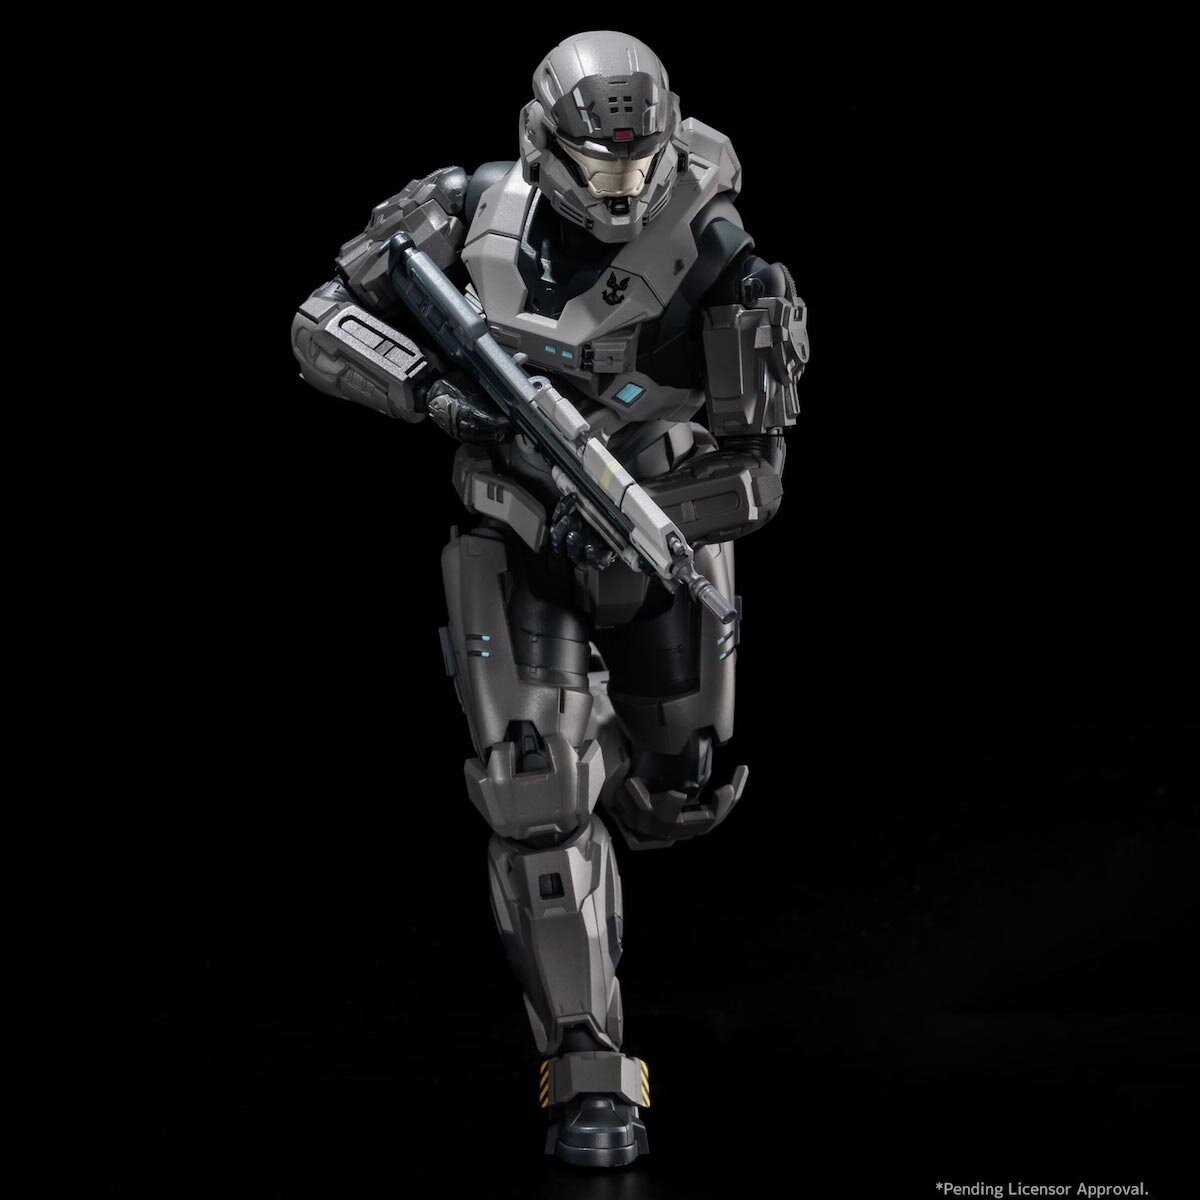 Halo: Reach Gets New Ranks and Armor